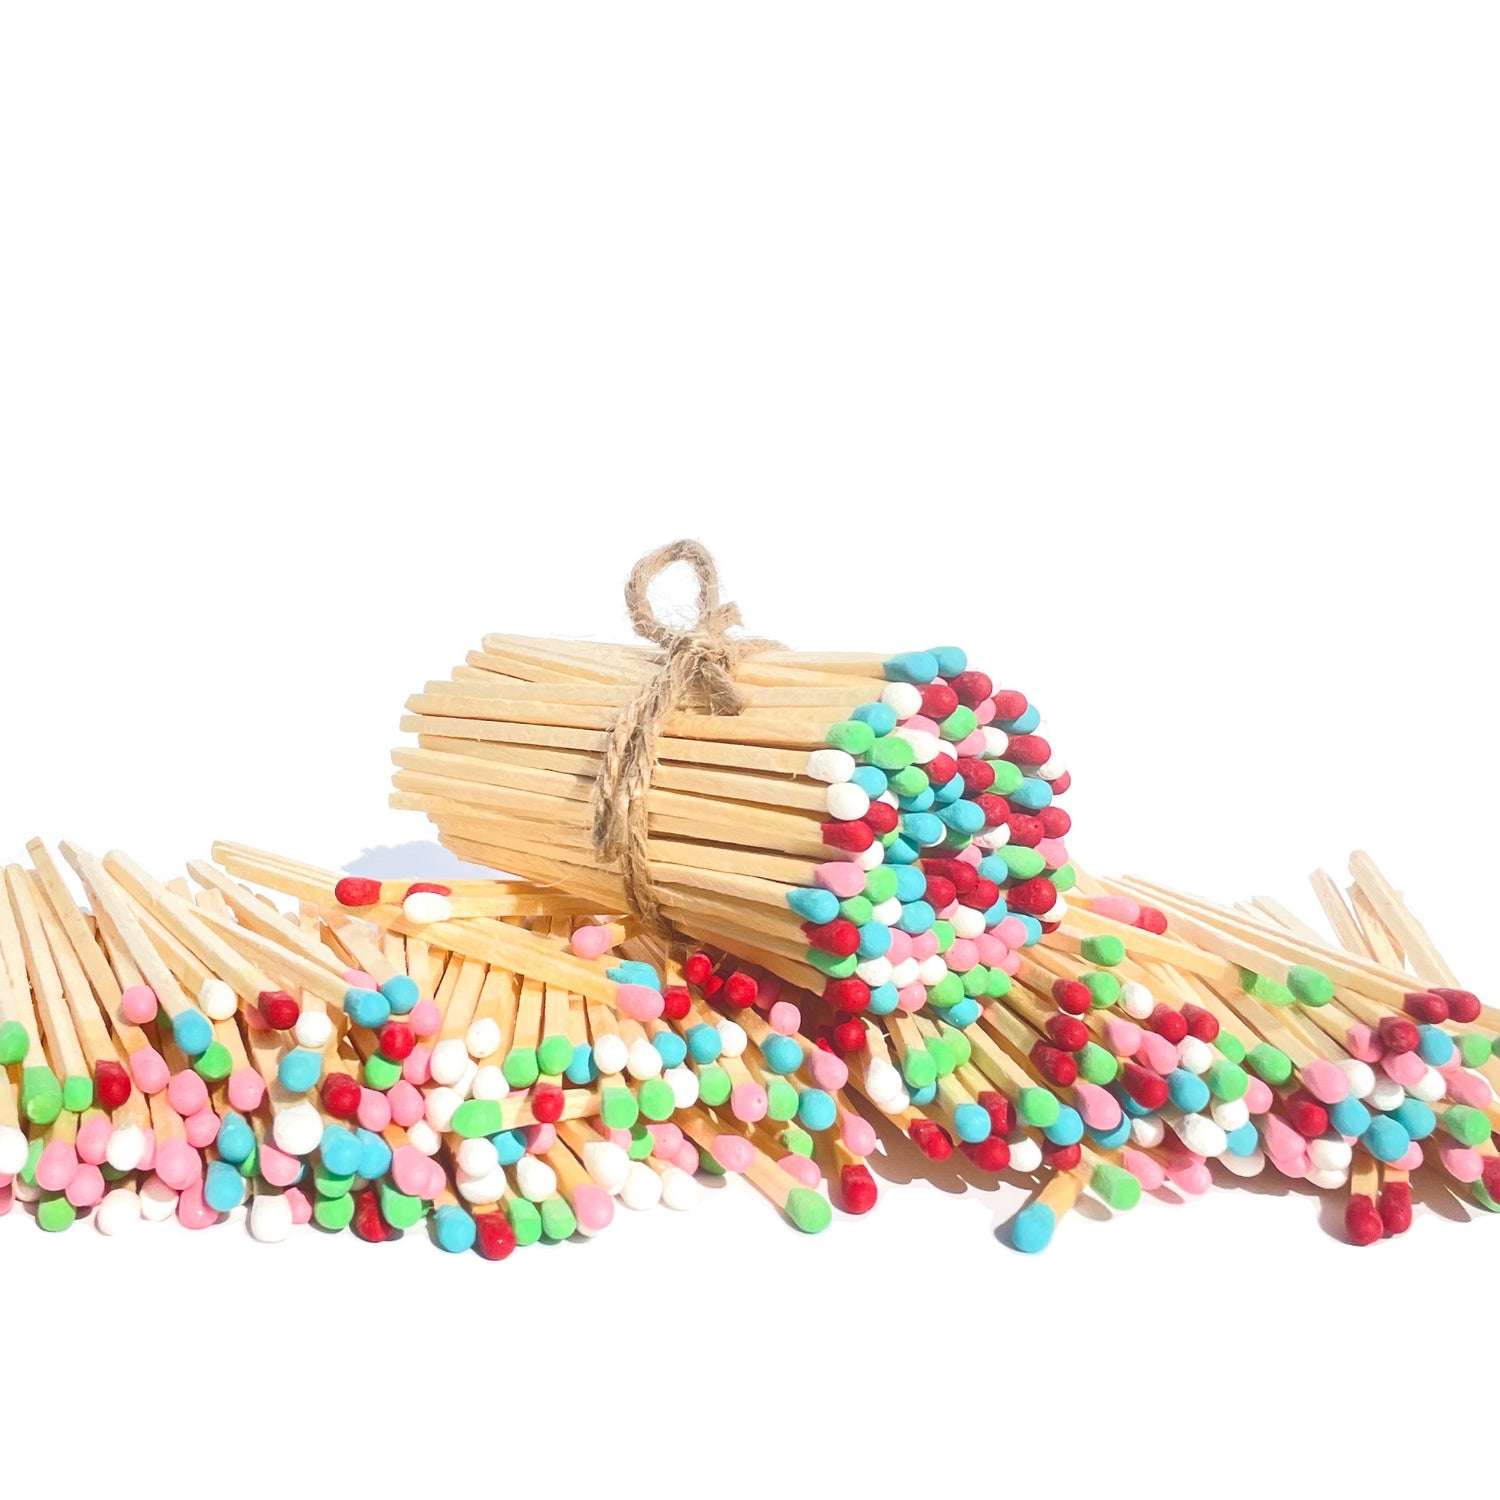 Bulk 3.75 Matches QTY: 100 to 15,000 Colored Matches Candle Matches Long  Matches Wooden Matches Safety Matches 